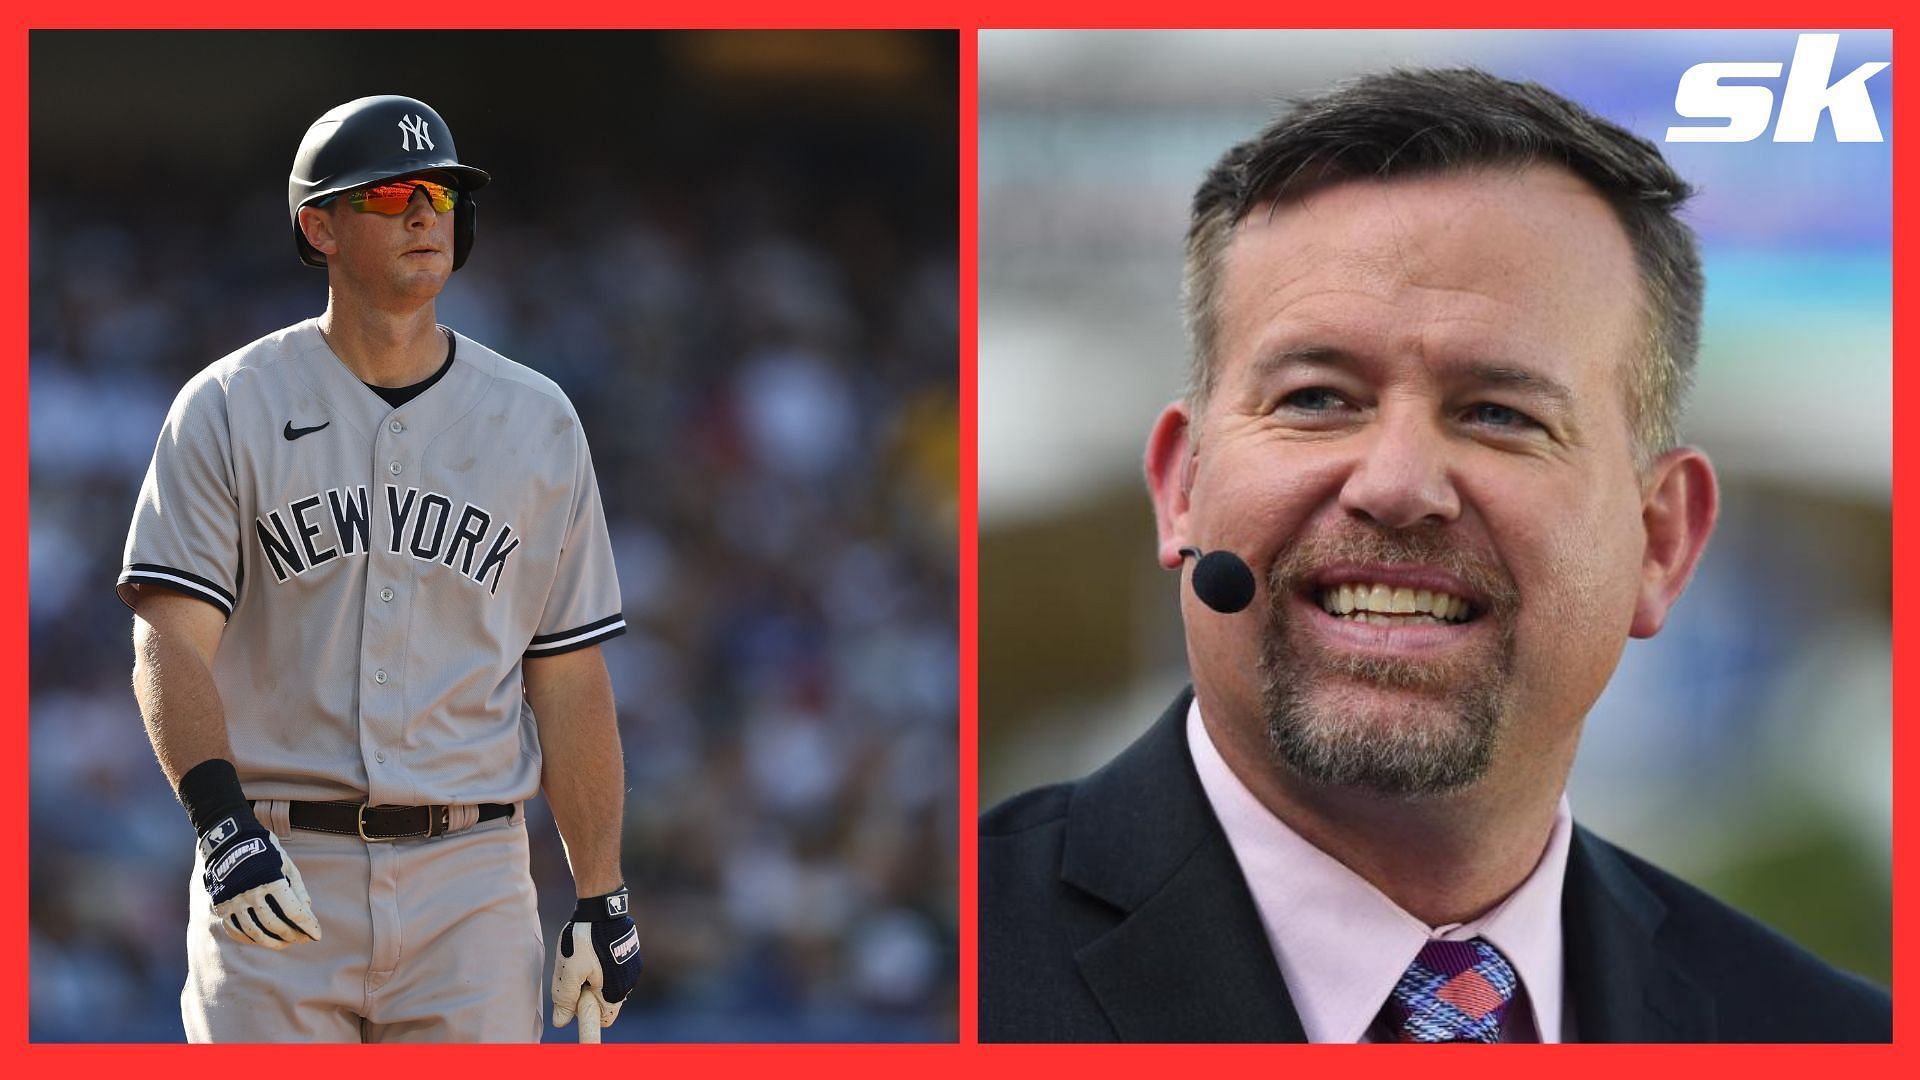 Sean Casey has been named as the New York Yankees hitting coach